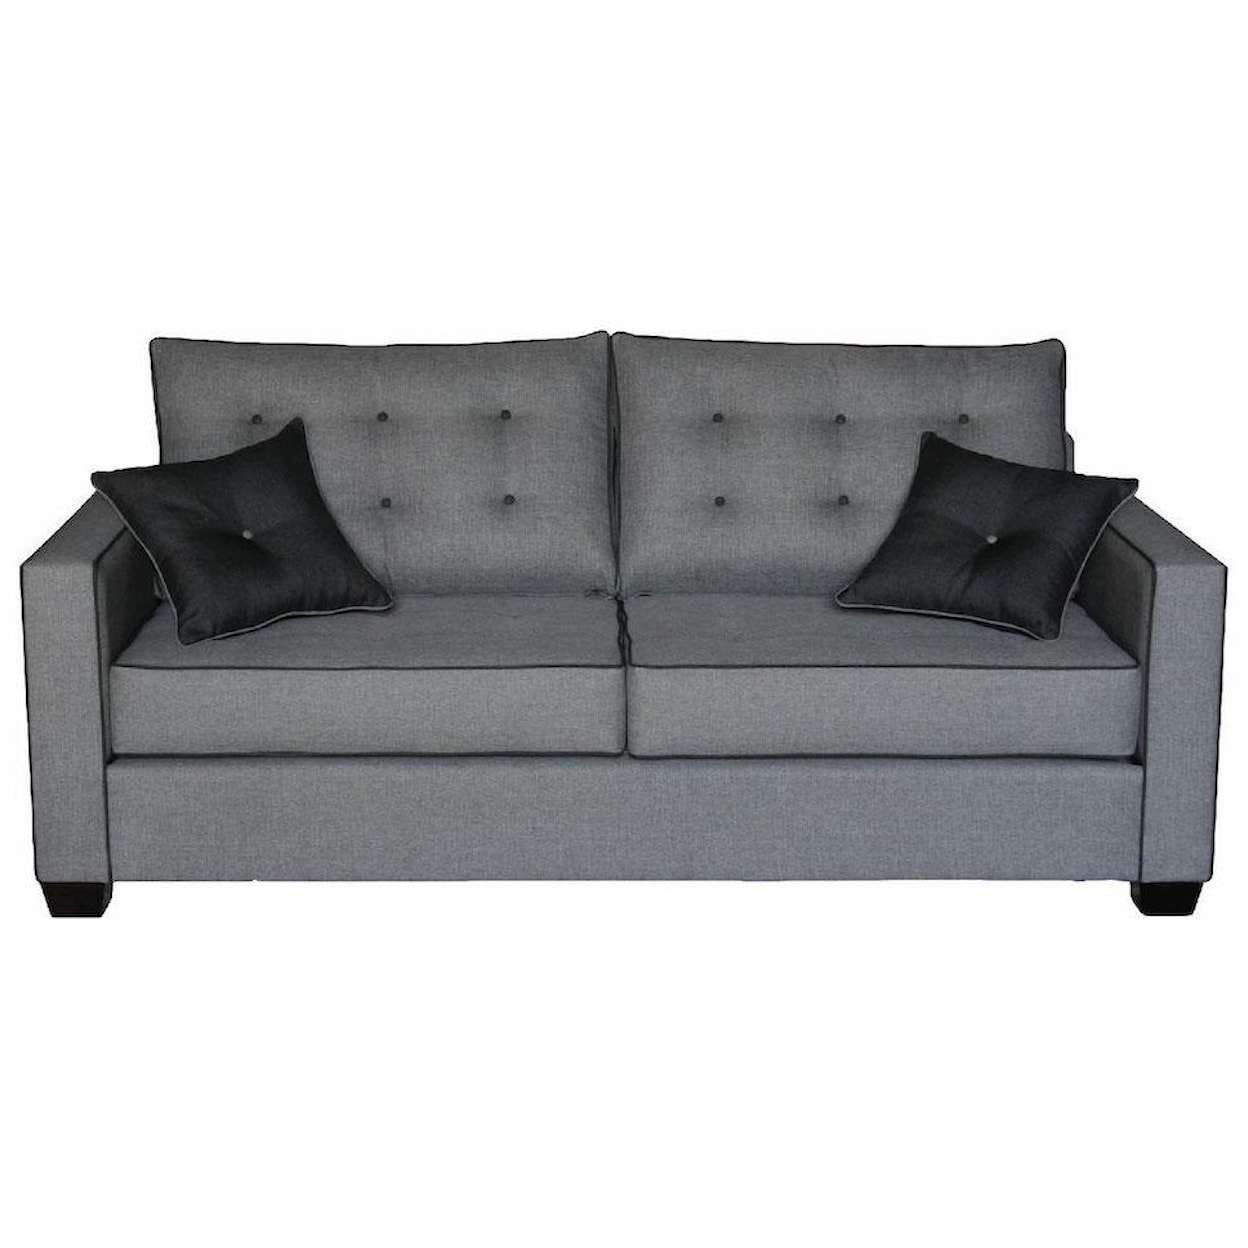 Sussex Upholstery Co. Claire 2 Cushion Sofa